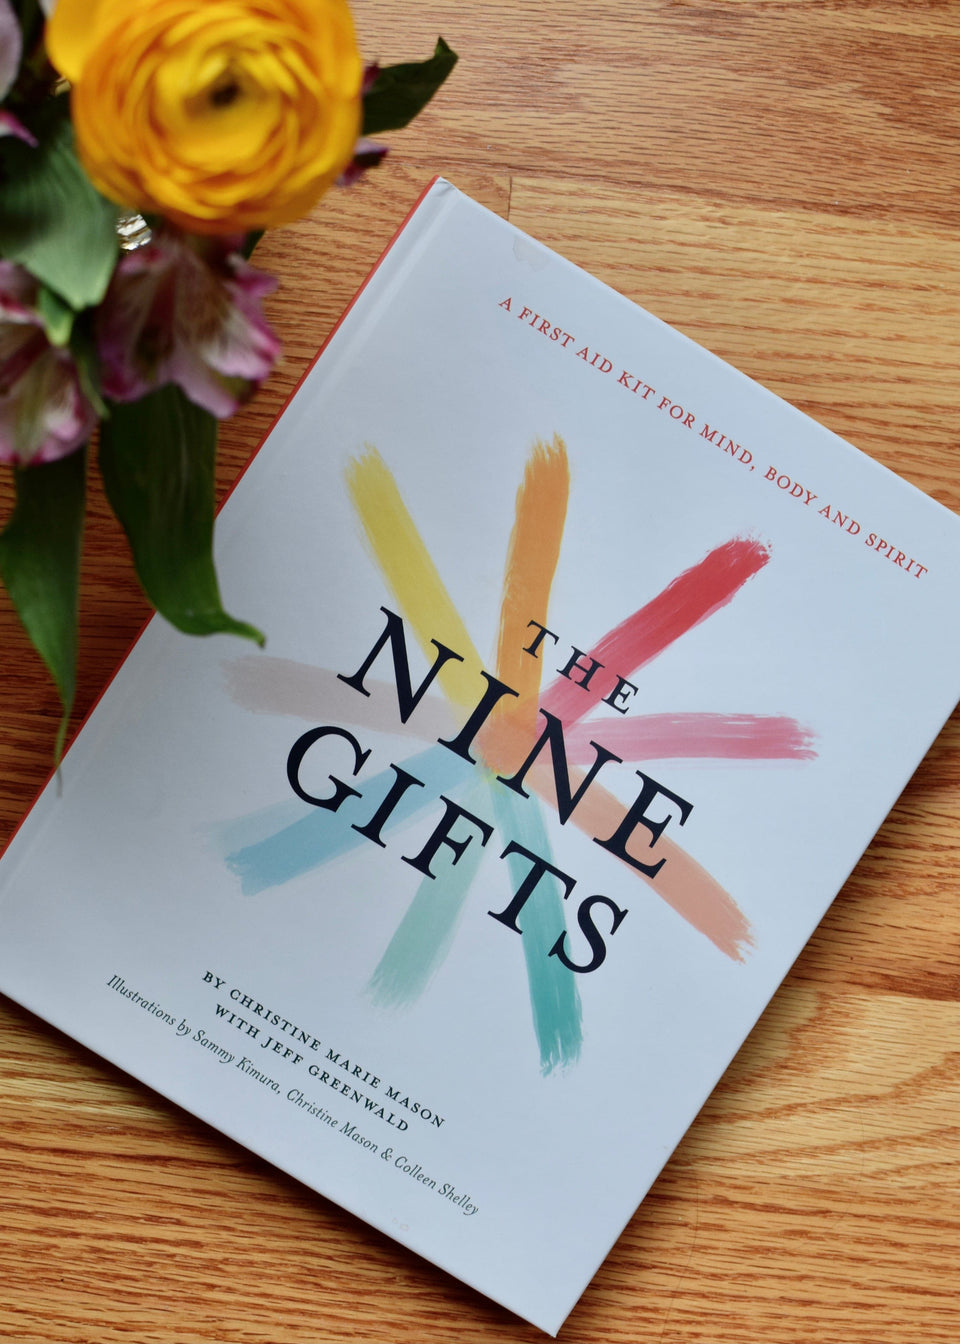 The Nine Gifts First Aid for Mind, Body and Spirit